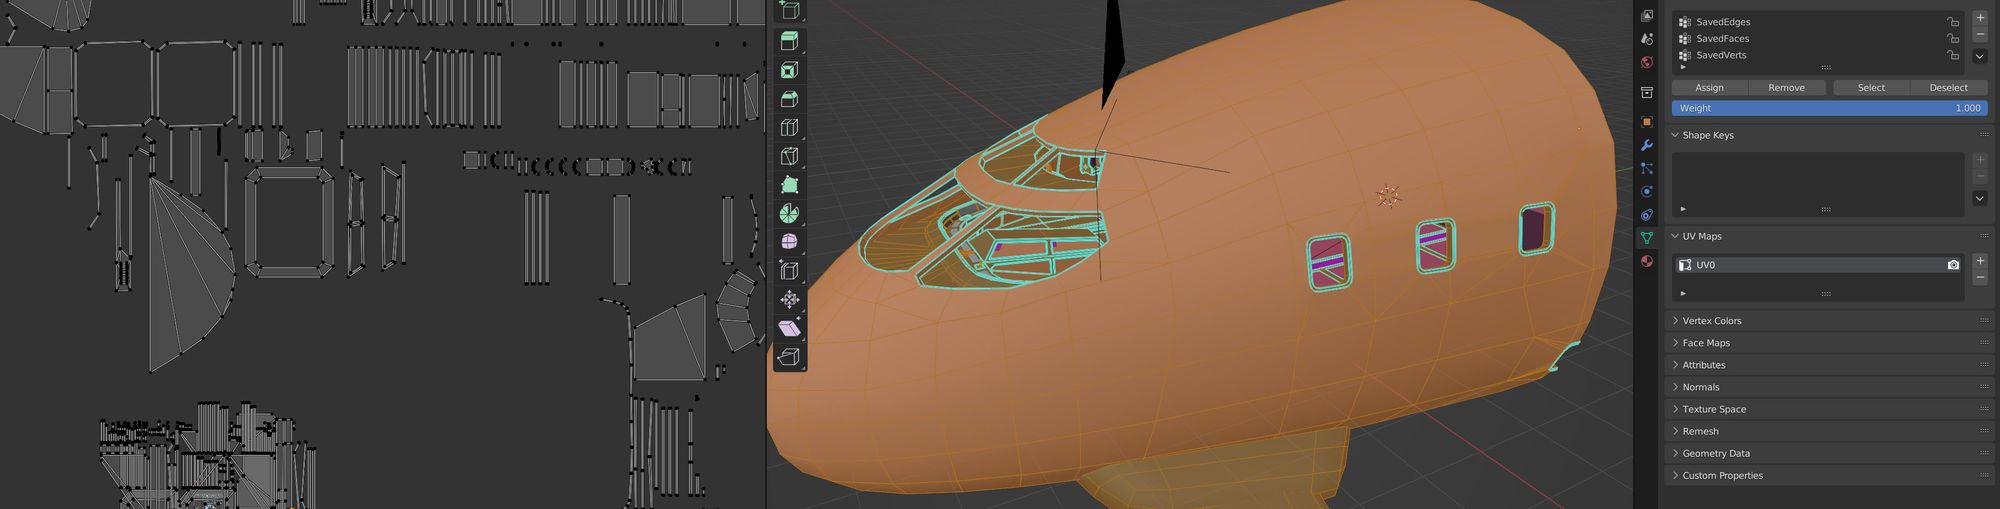 A split view of Blender's 2d UV Editor, a 3d view, and the Properties panel showing the UV Map channels.